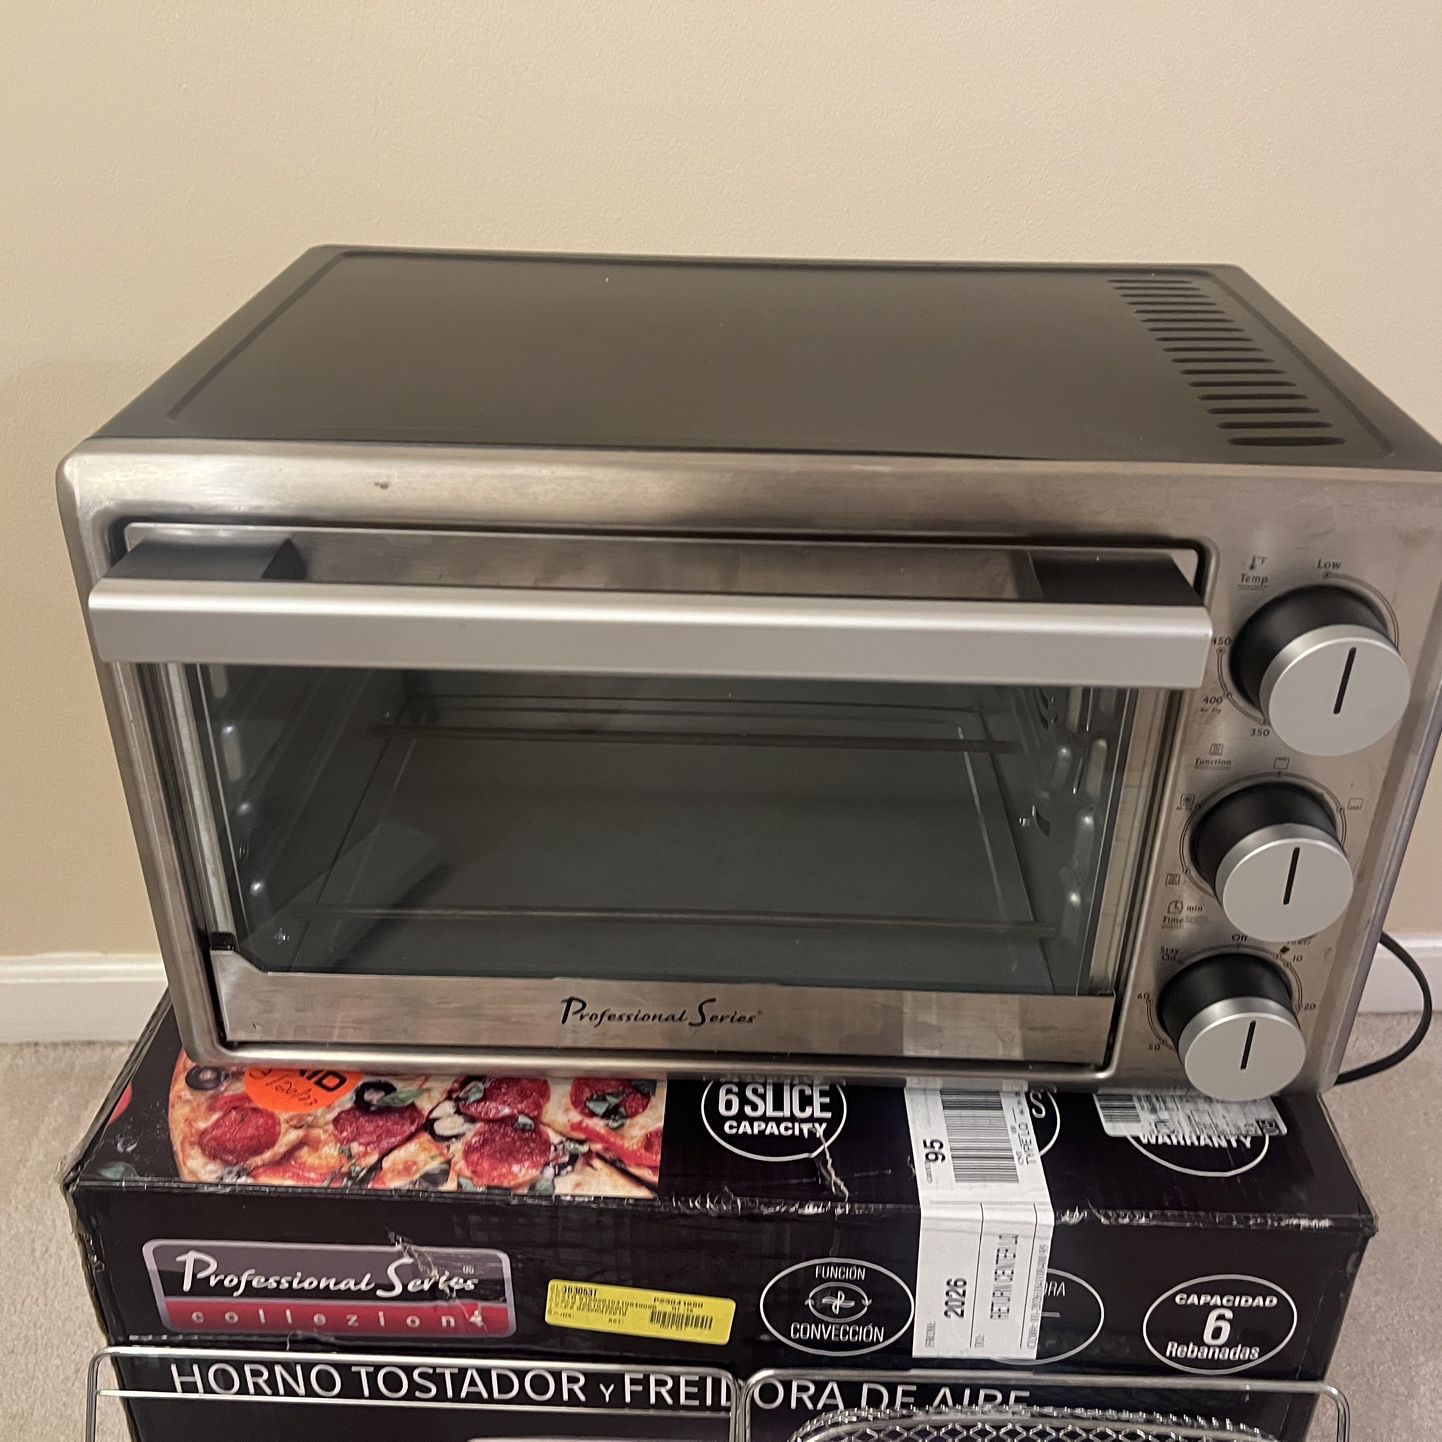 Professional Series Toaster Oven & Air Fryer